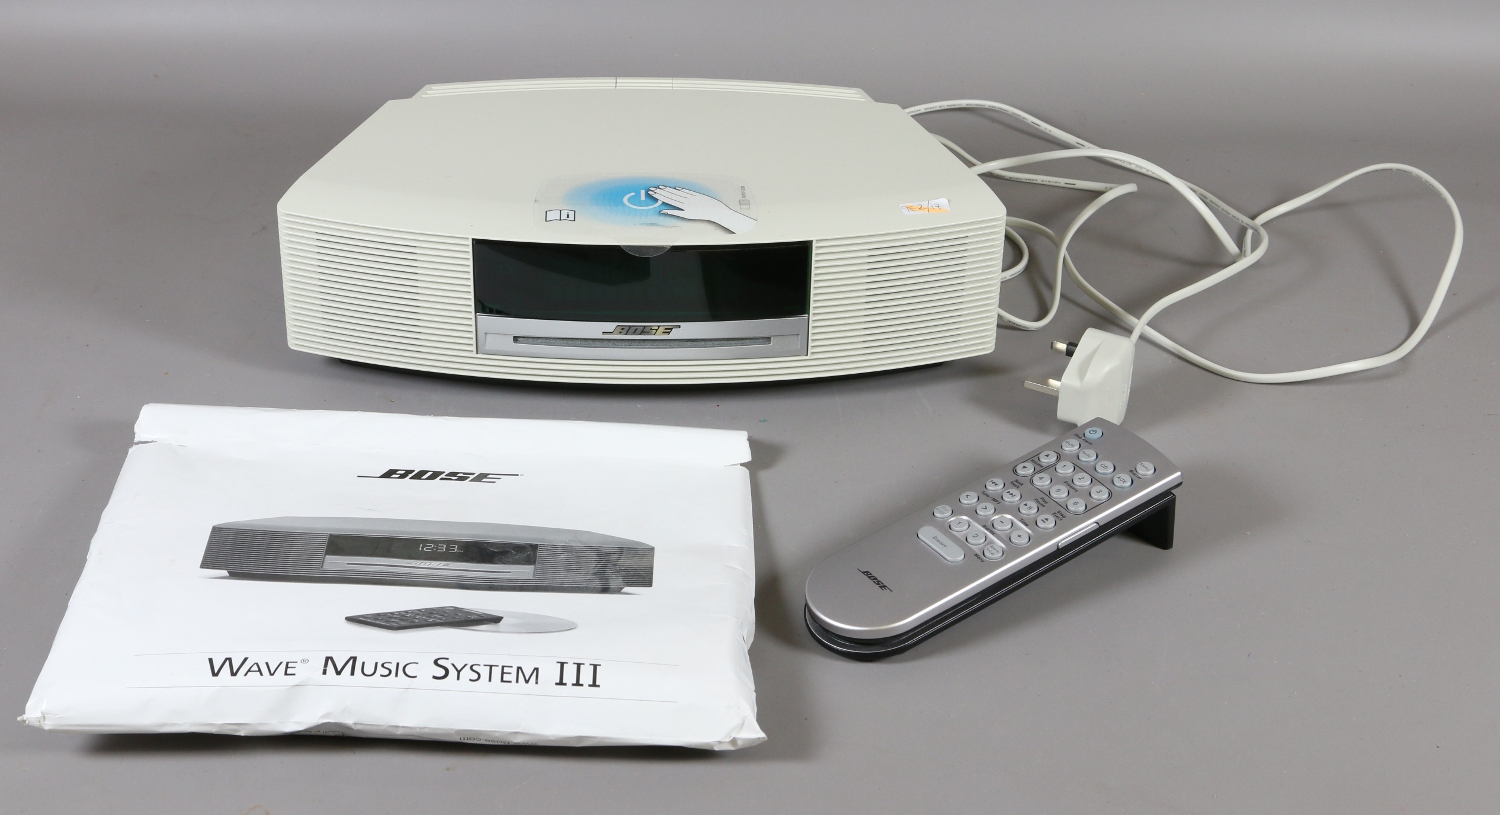 A Bose Wave music system 111 with remote control and manual { in office }